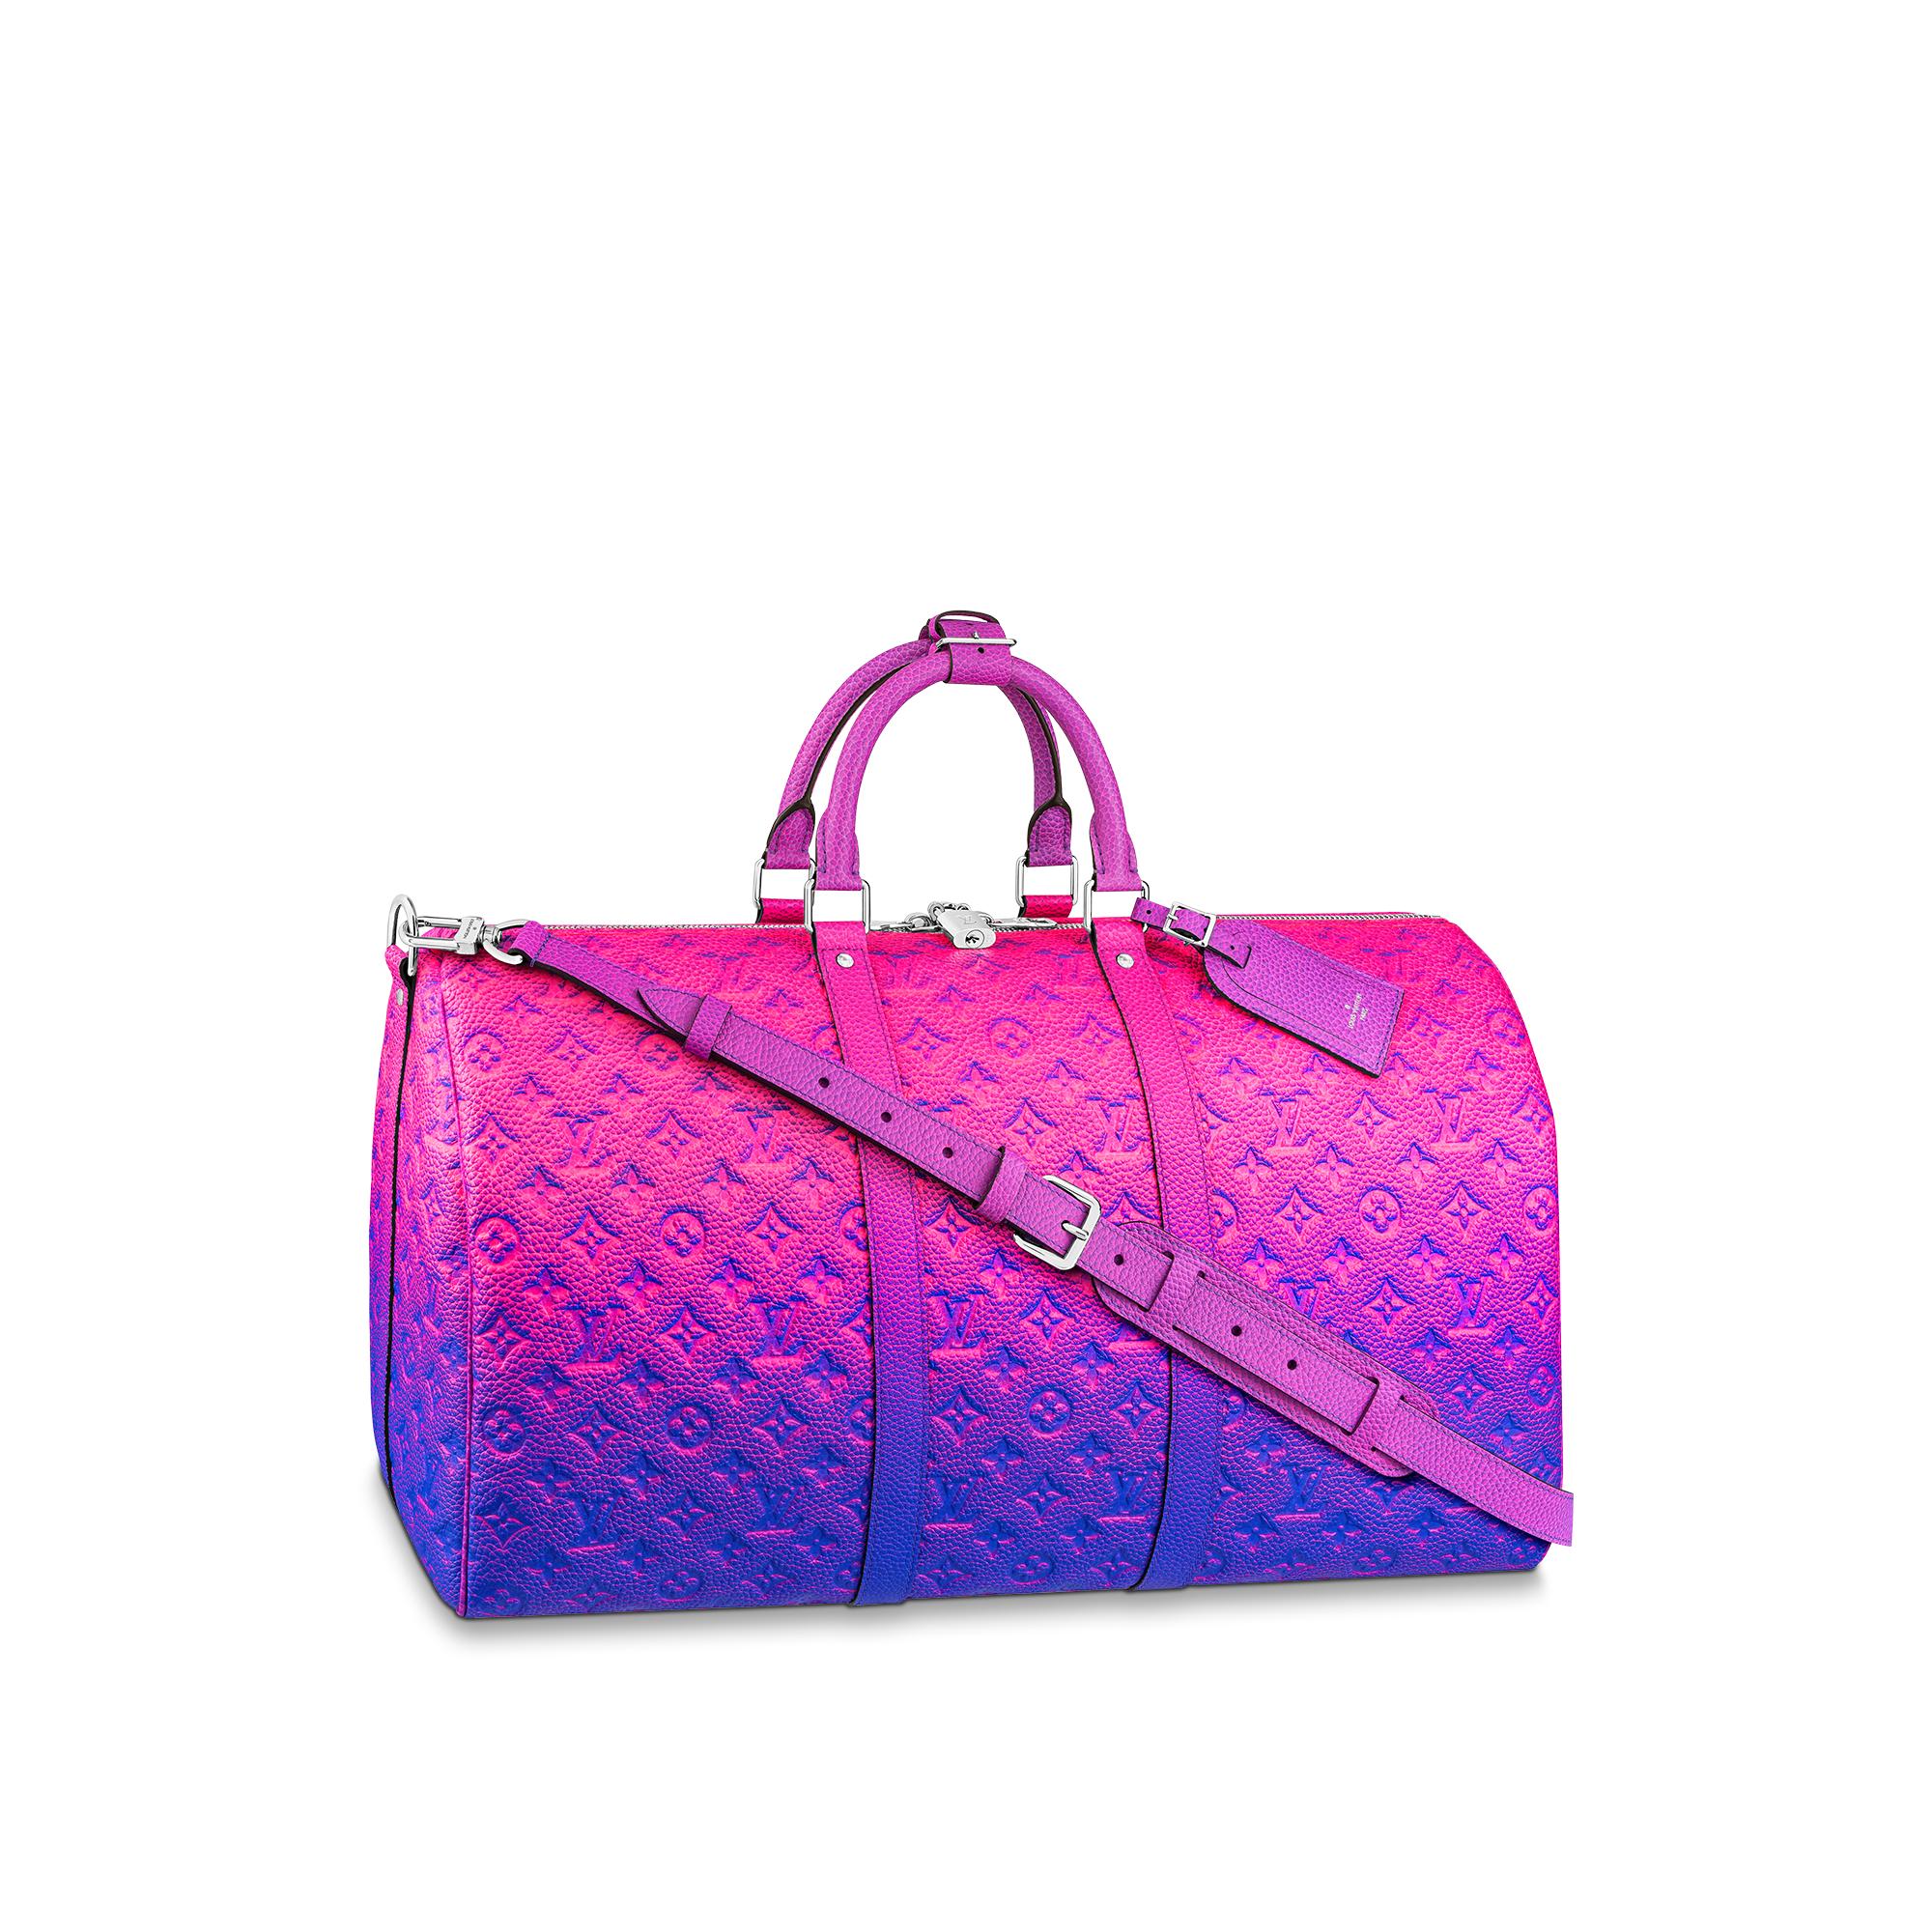 That Wild and Crazy Louis Vuitton Bags Sale in Tokyo! – The Bag